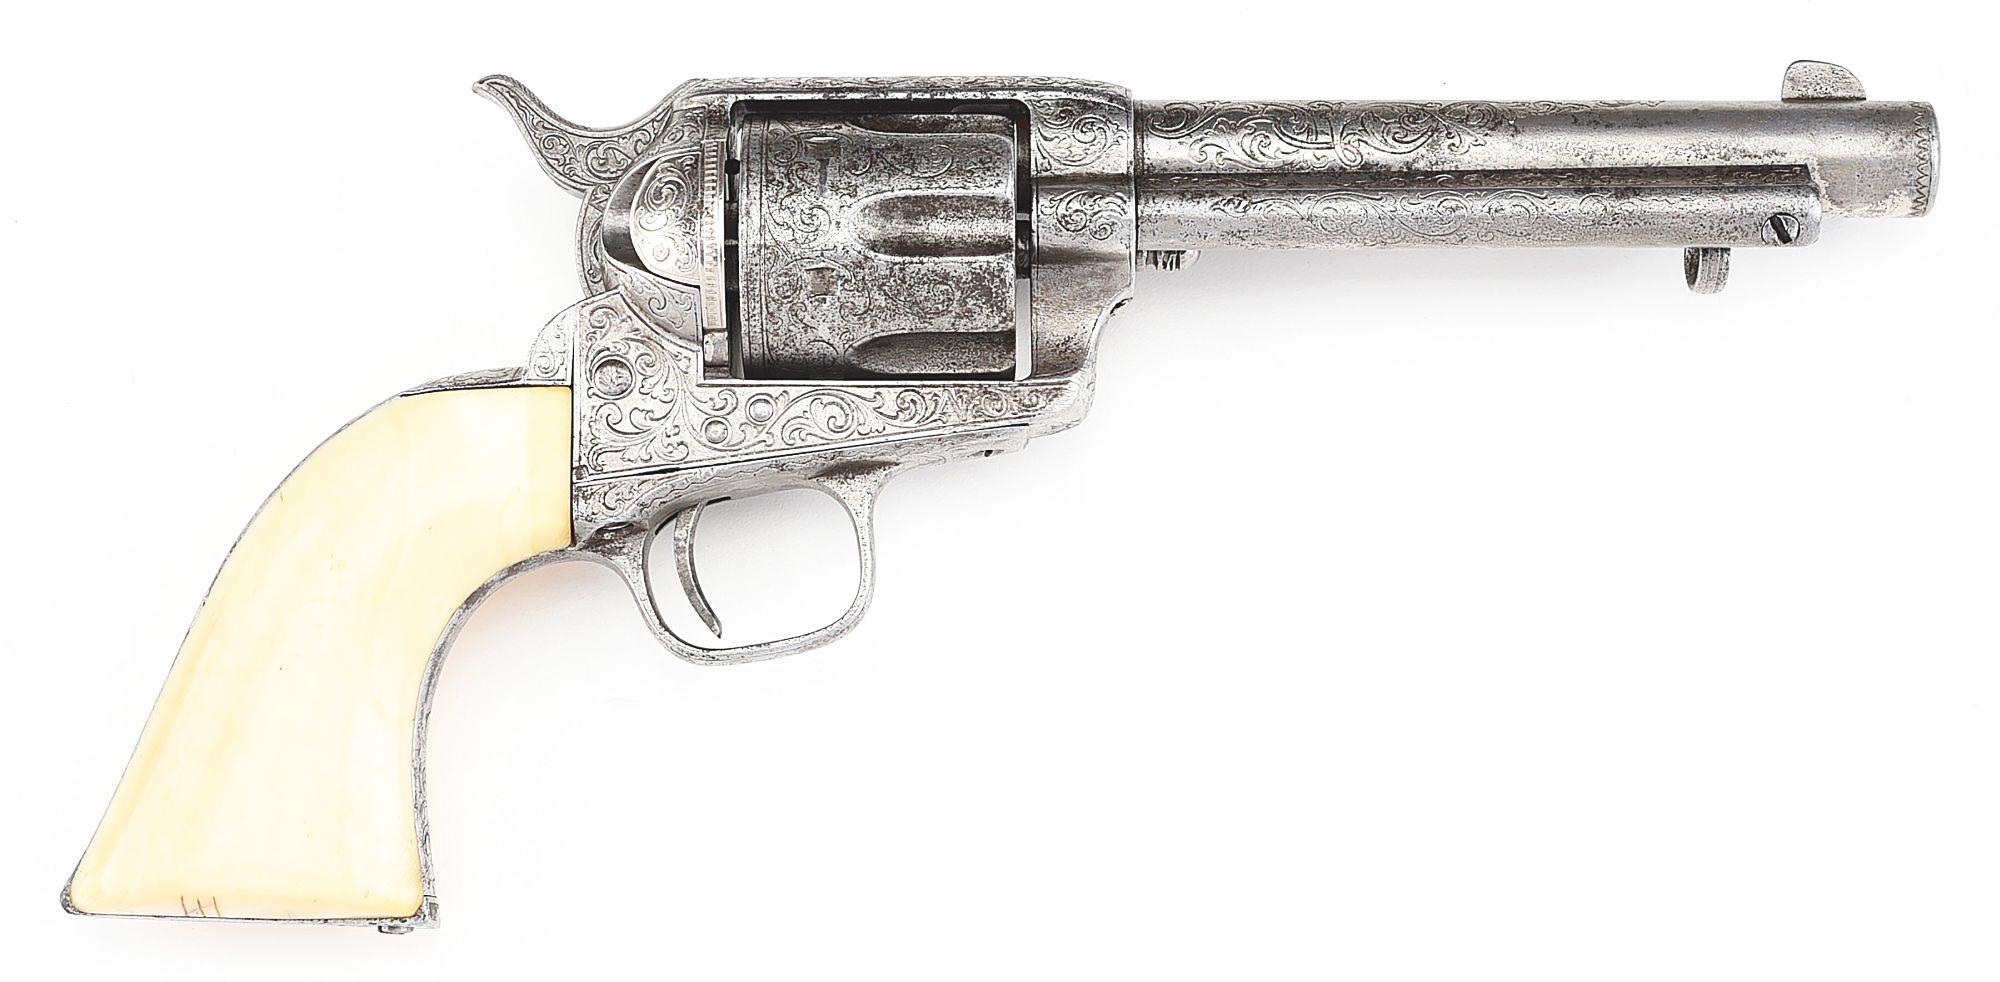 (A) HISTORIC DOCUMENTED FACTORY ENGRAVED COLT SINGLE ACTION ARMY REVOLVER FROM THE 1876 CENTENNIAL E